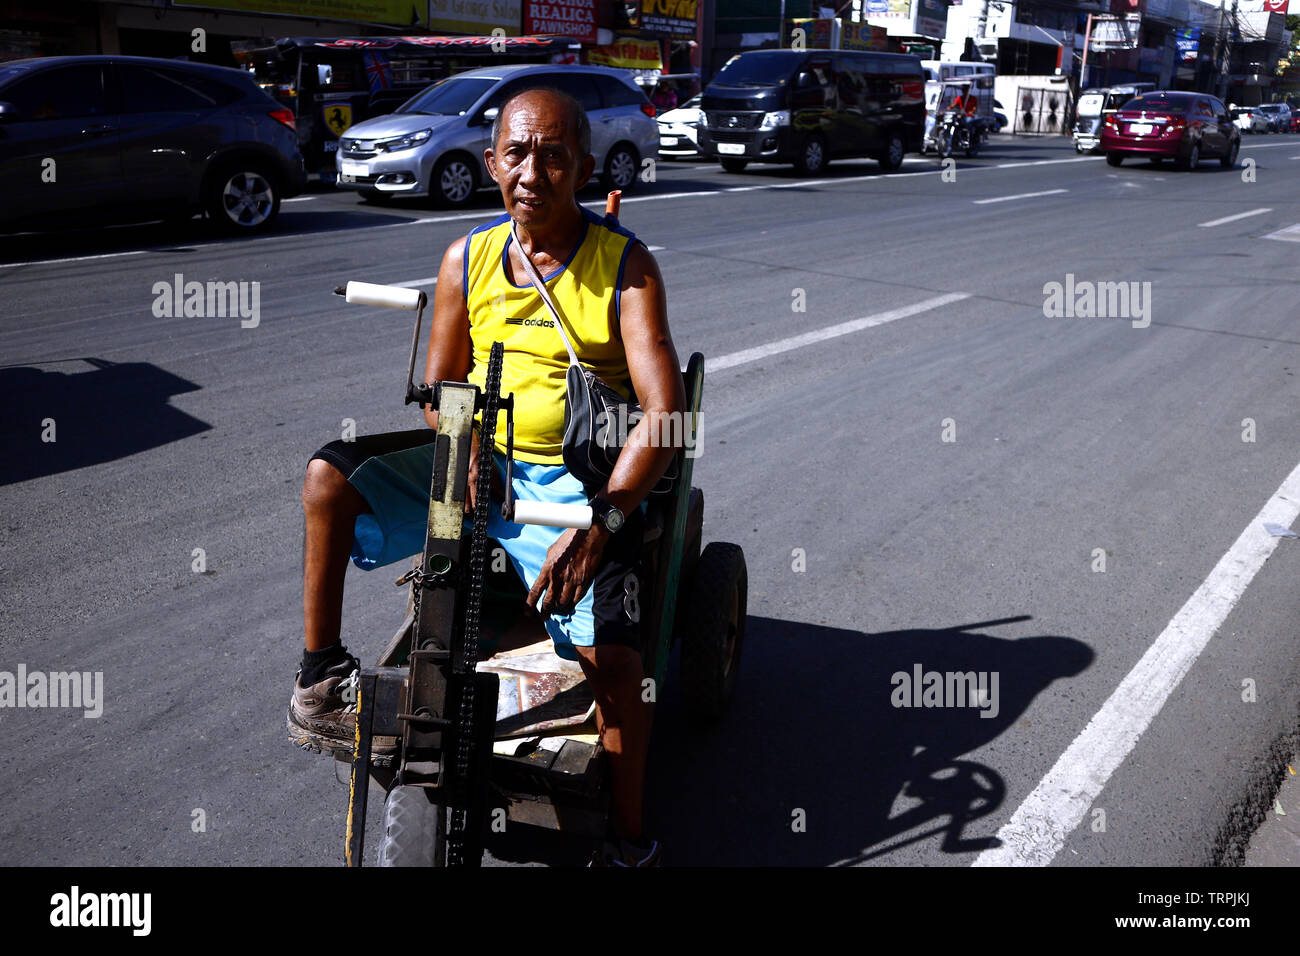 ANTIPOLO CITY, PHILIPPINES – JUNE 7, 2019: A person with disability peddles candies and cigarettes on his improvised wheelchair at a busy street. Stock Photo